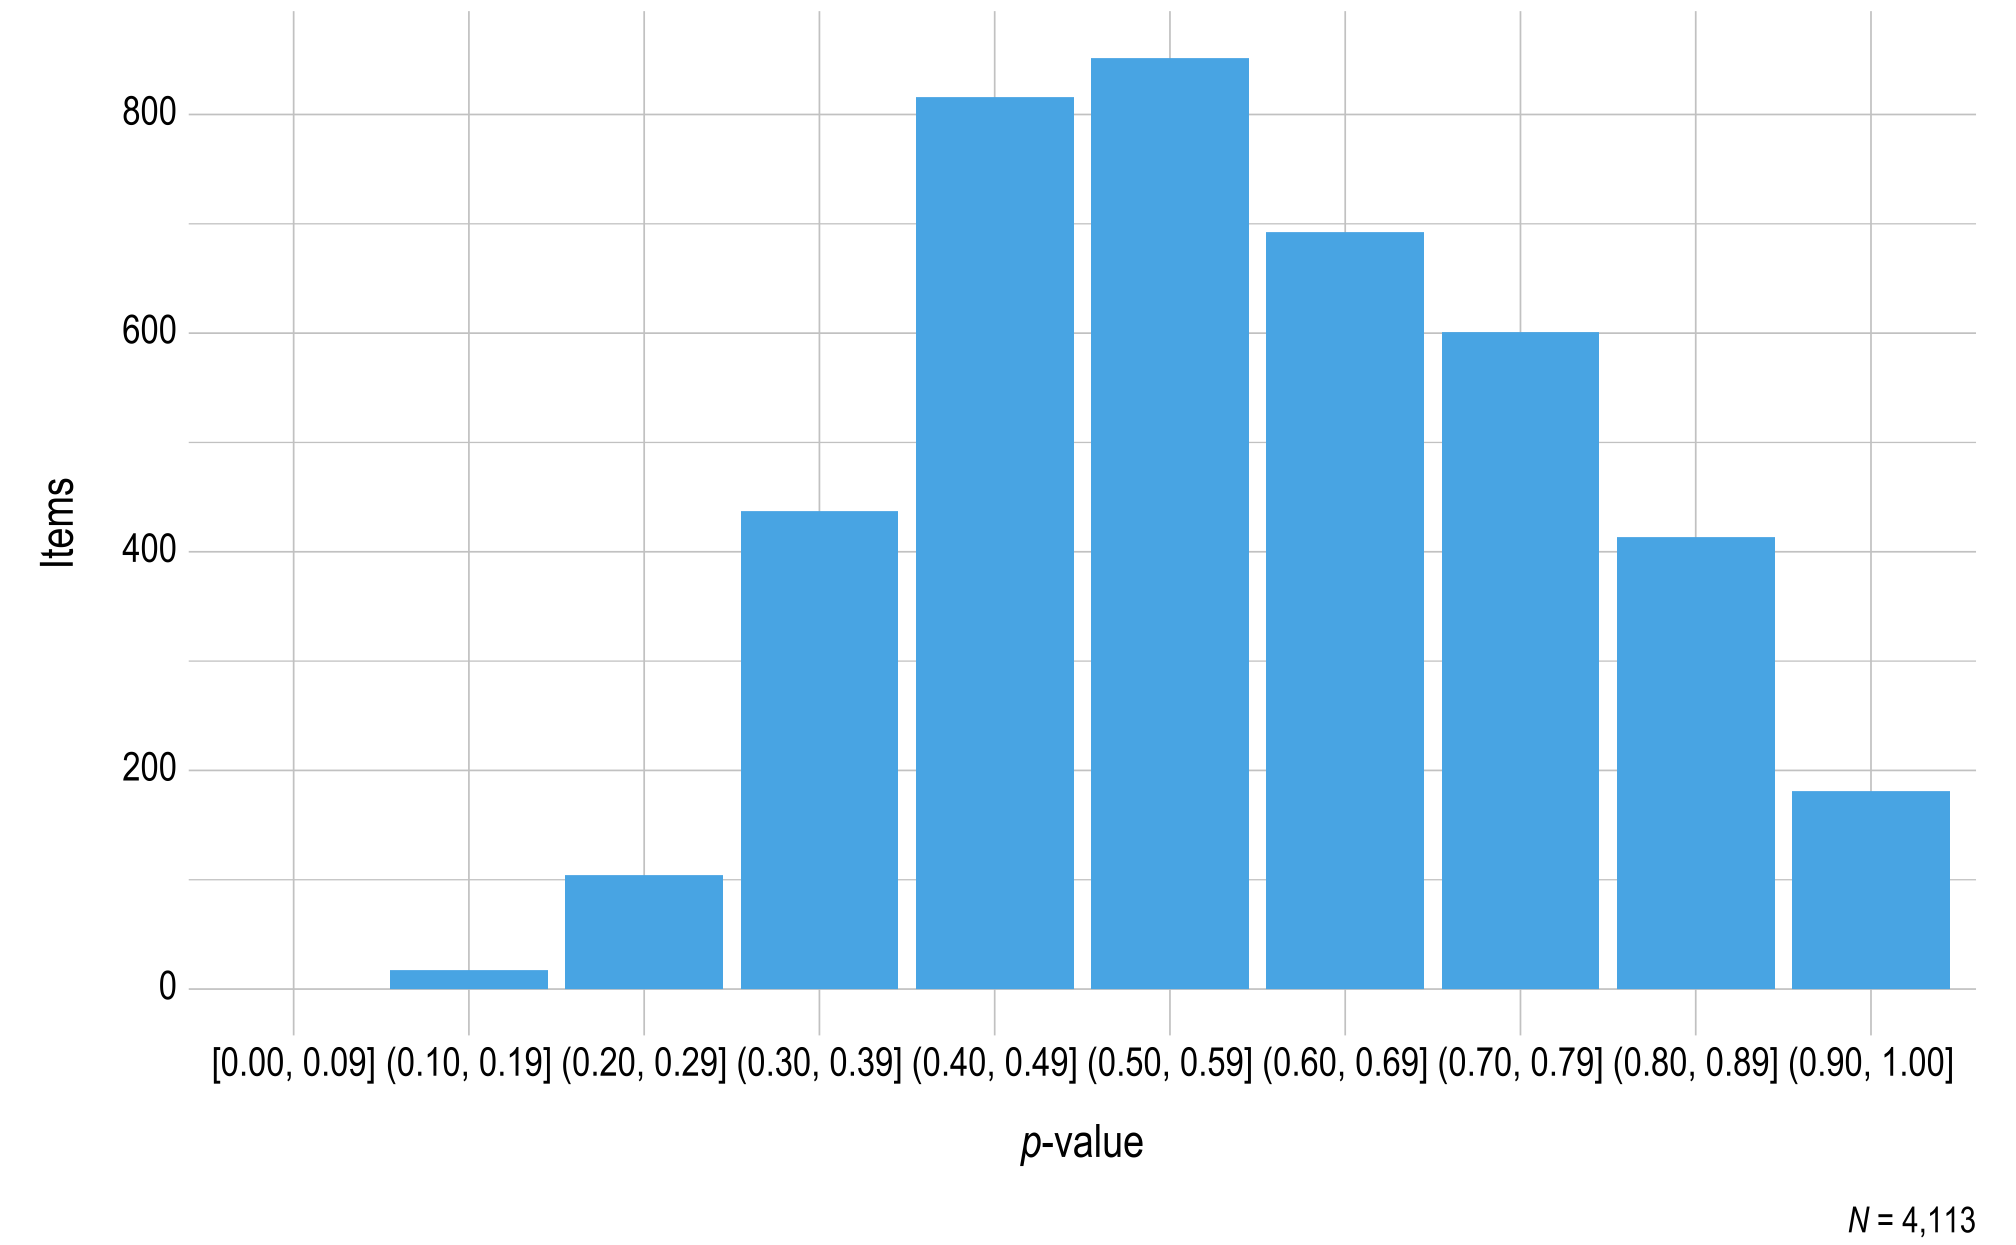 This figure contains a histogram displaying p-value on the x-axis and the number of mathematics operational items on the y-axis.